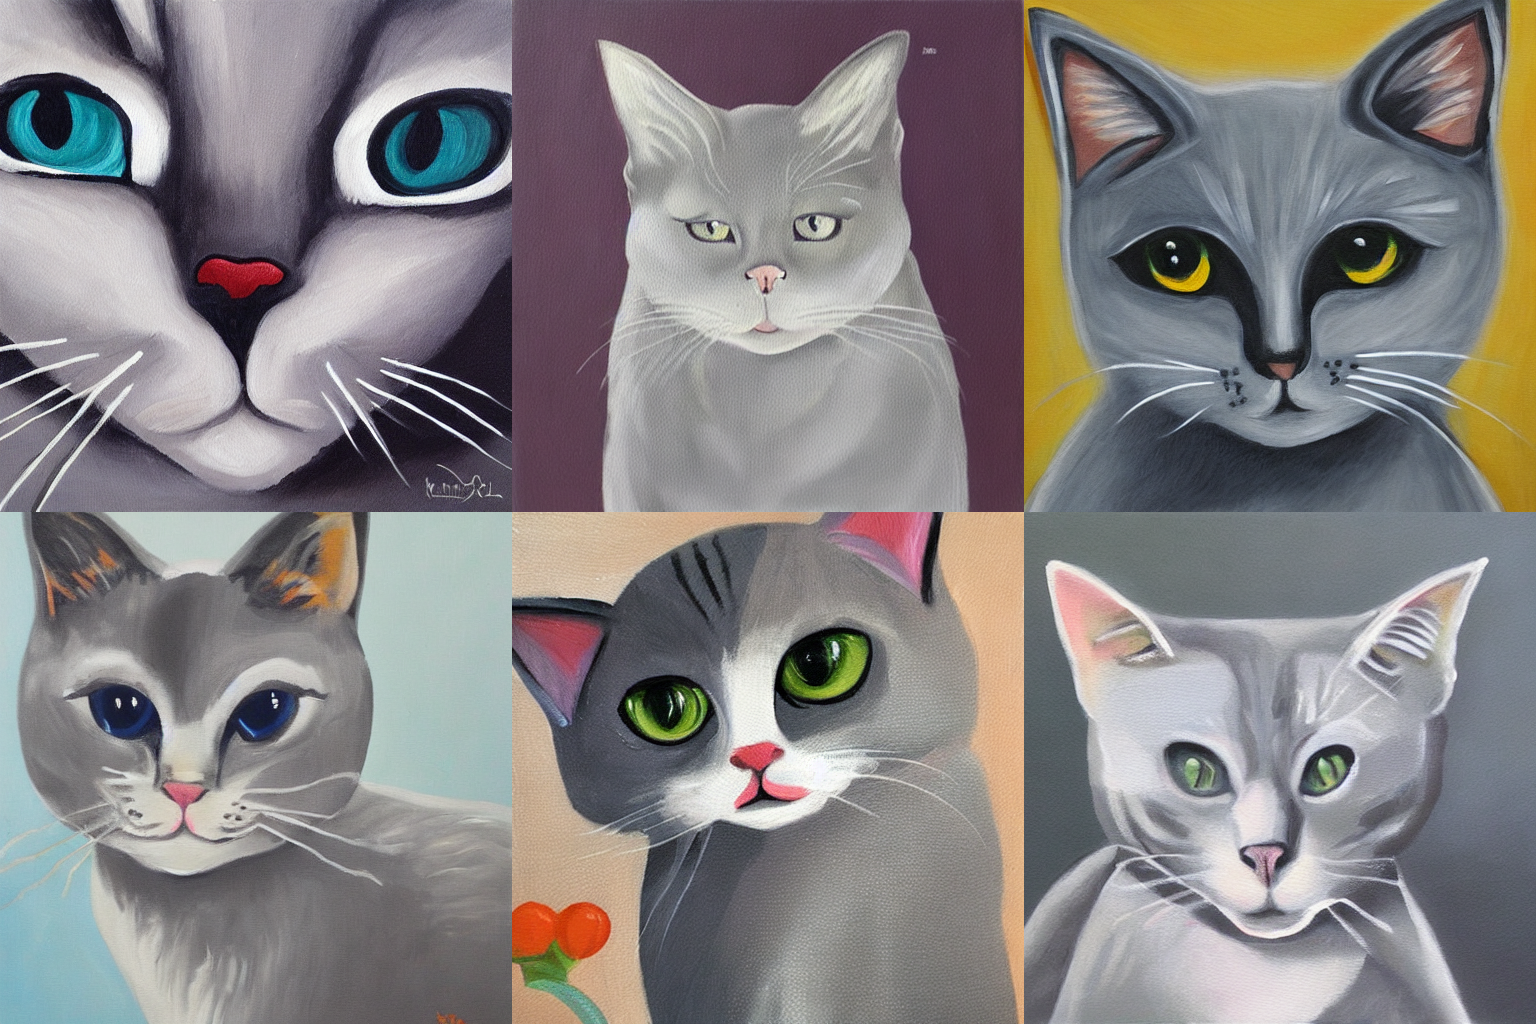 6 grey cats from Stable Diffusion that look like acrylic paintings. 